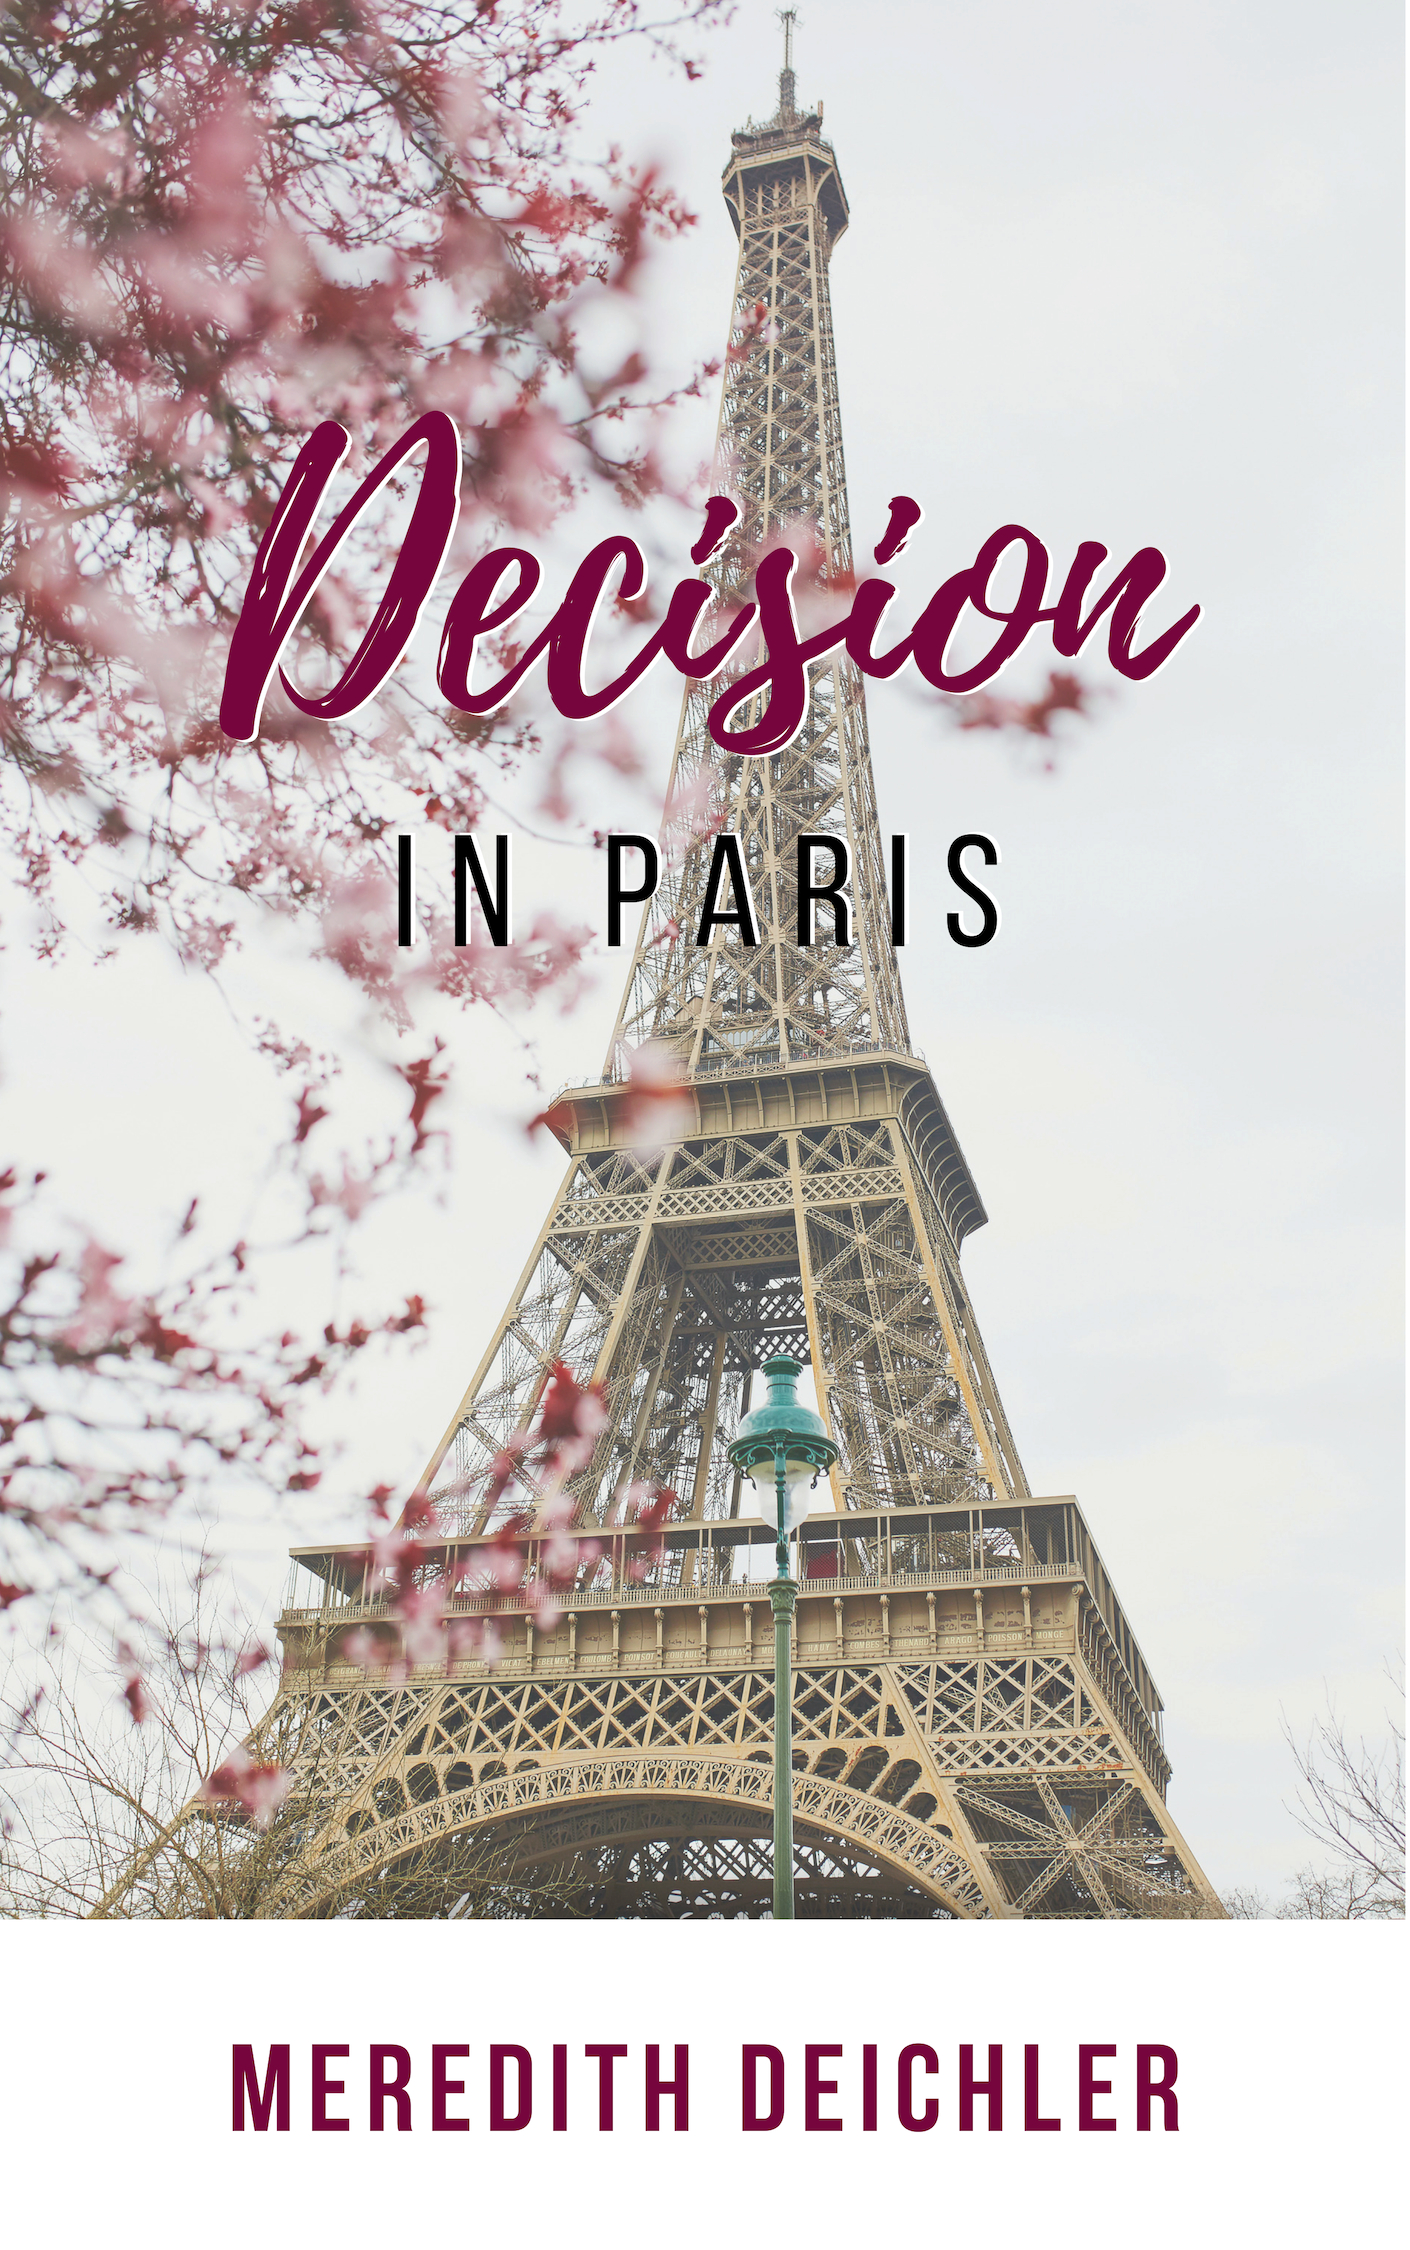 FREE: Decision in Paris by Meredith Deichler